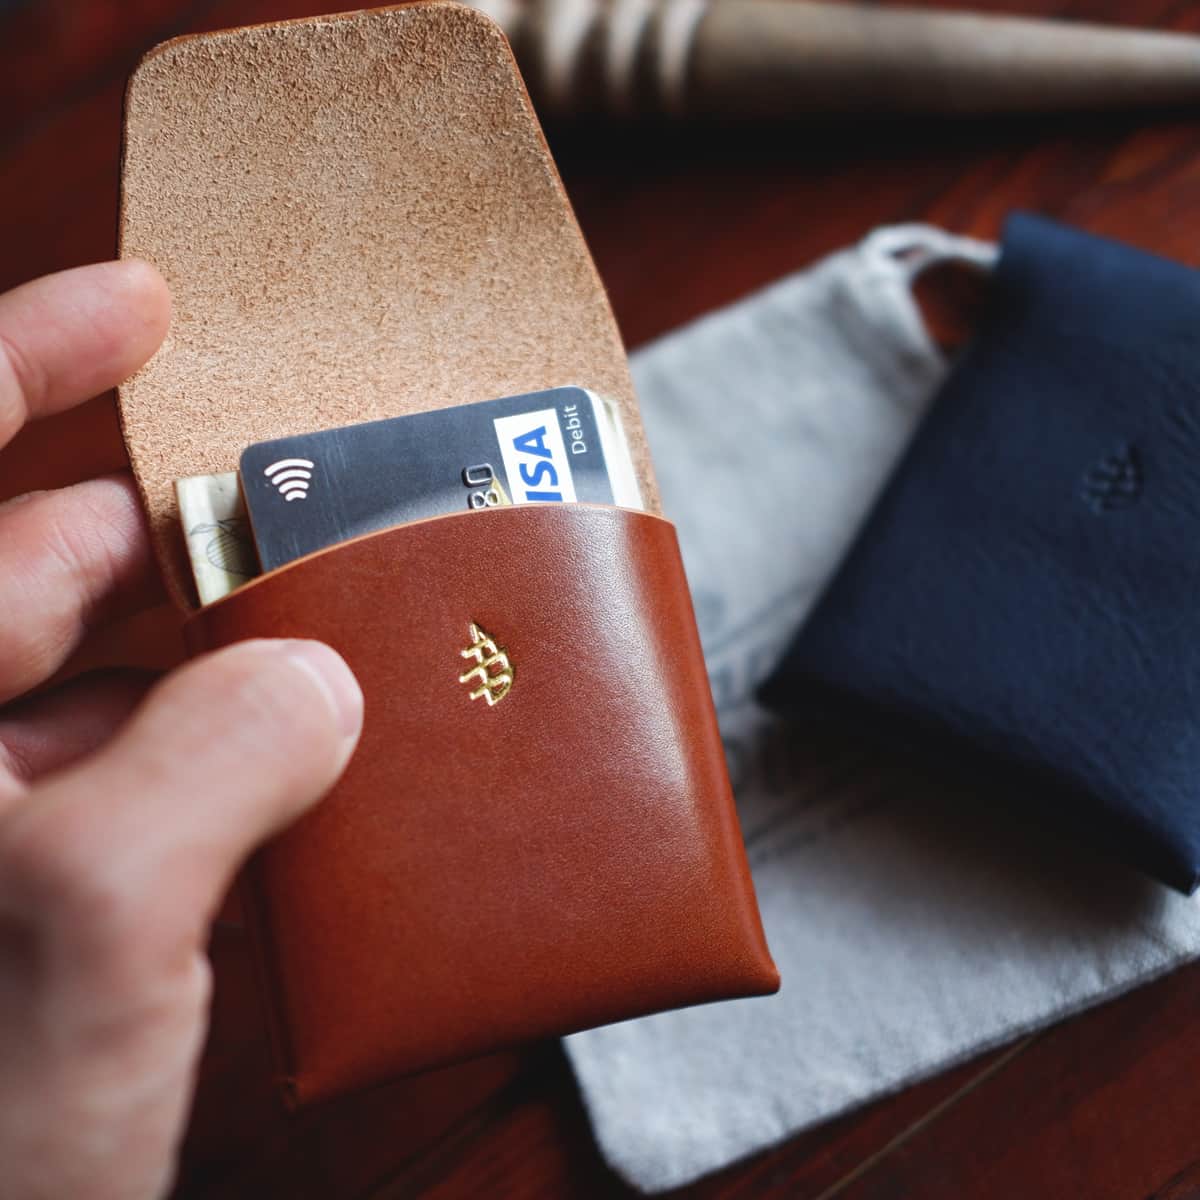 The Lodgepole Stitchless Wallet in Firenze Lux leather - interior with cards and cash